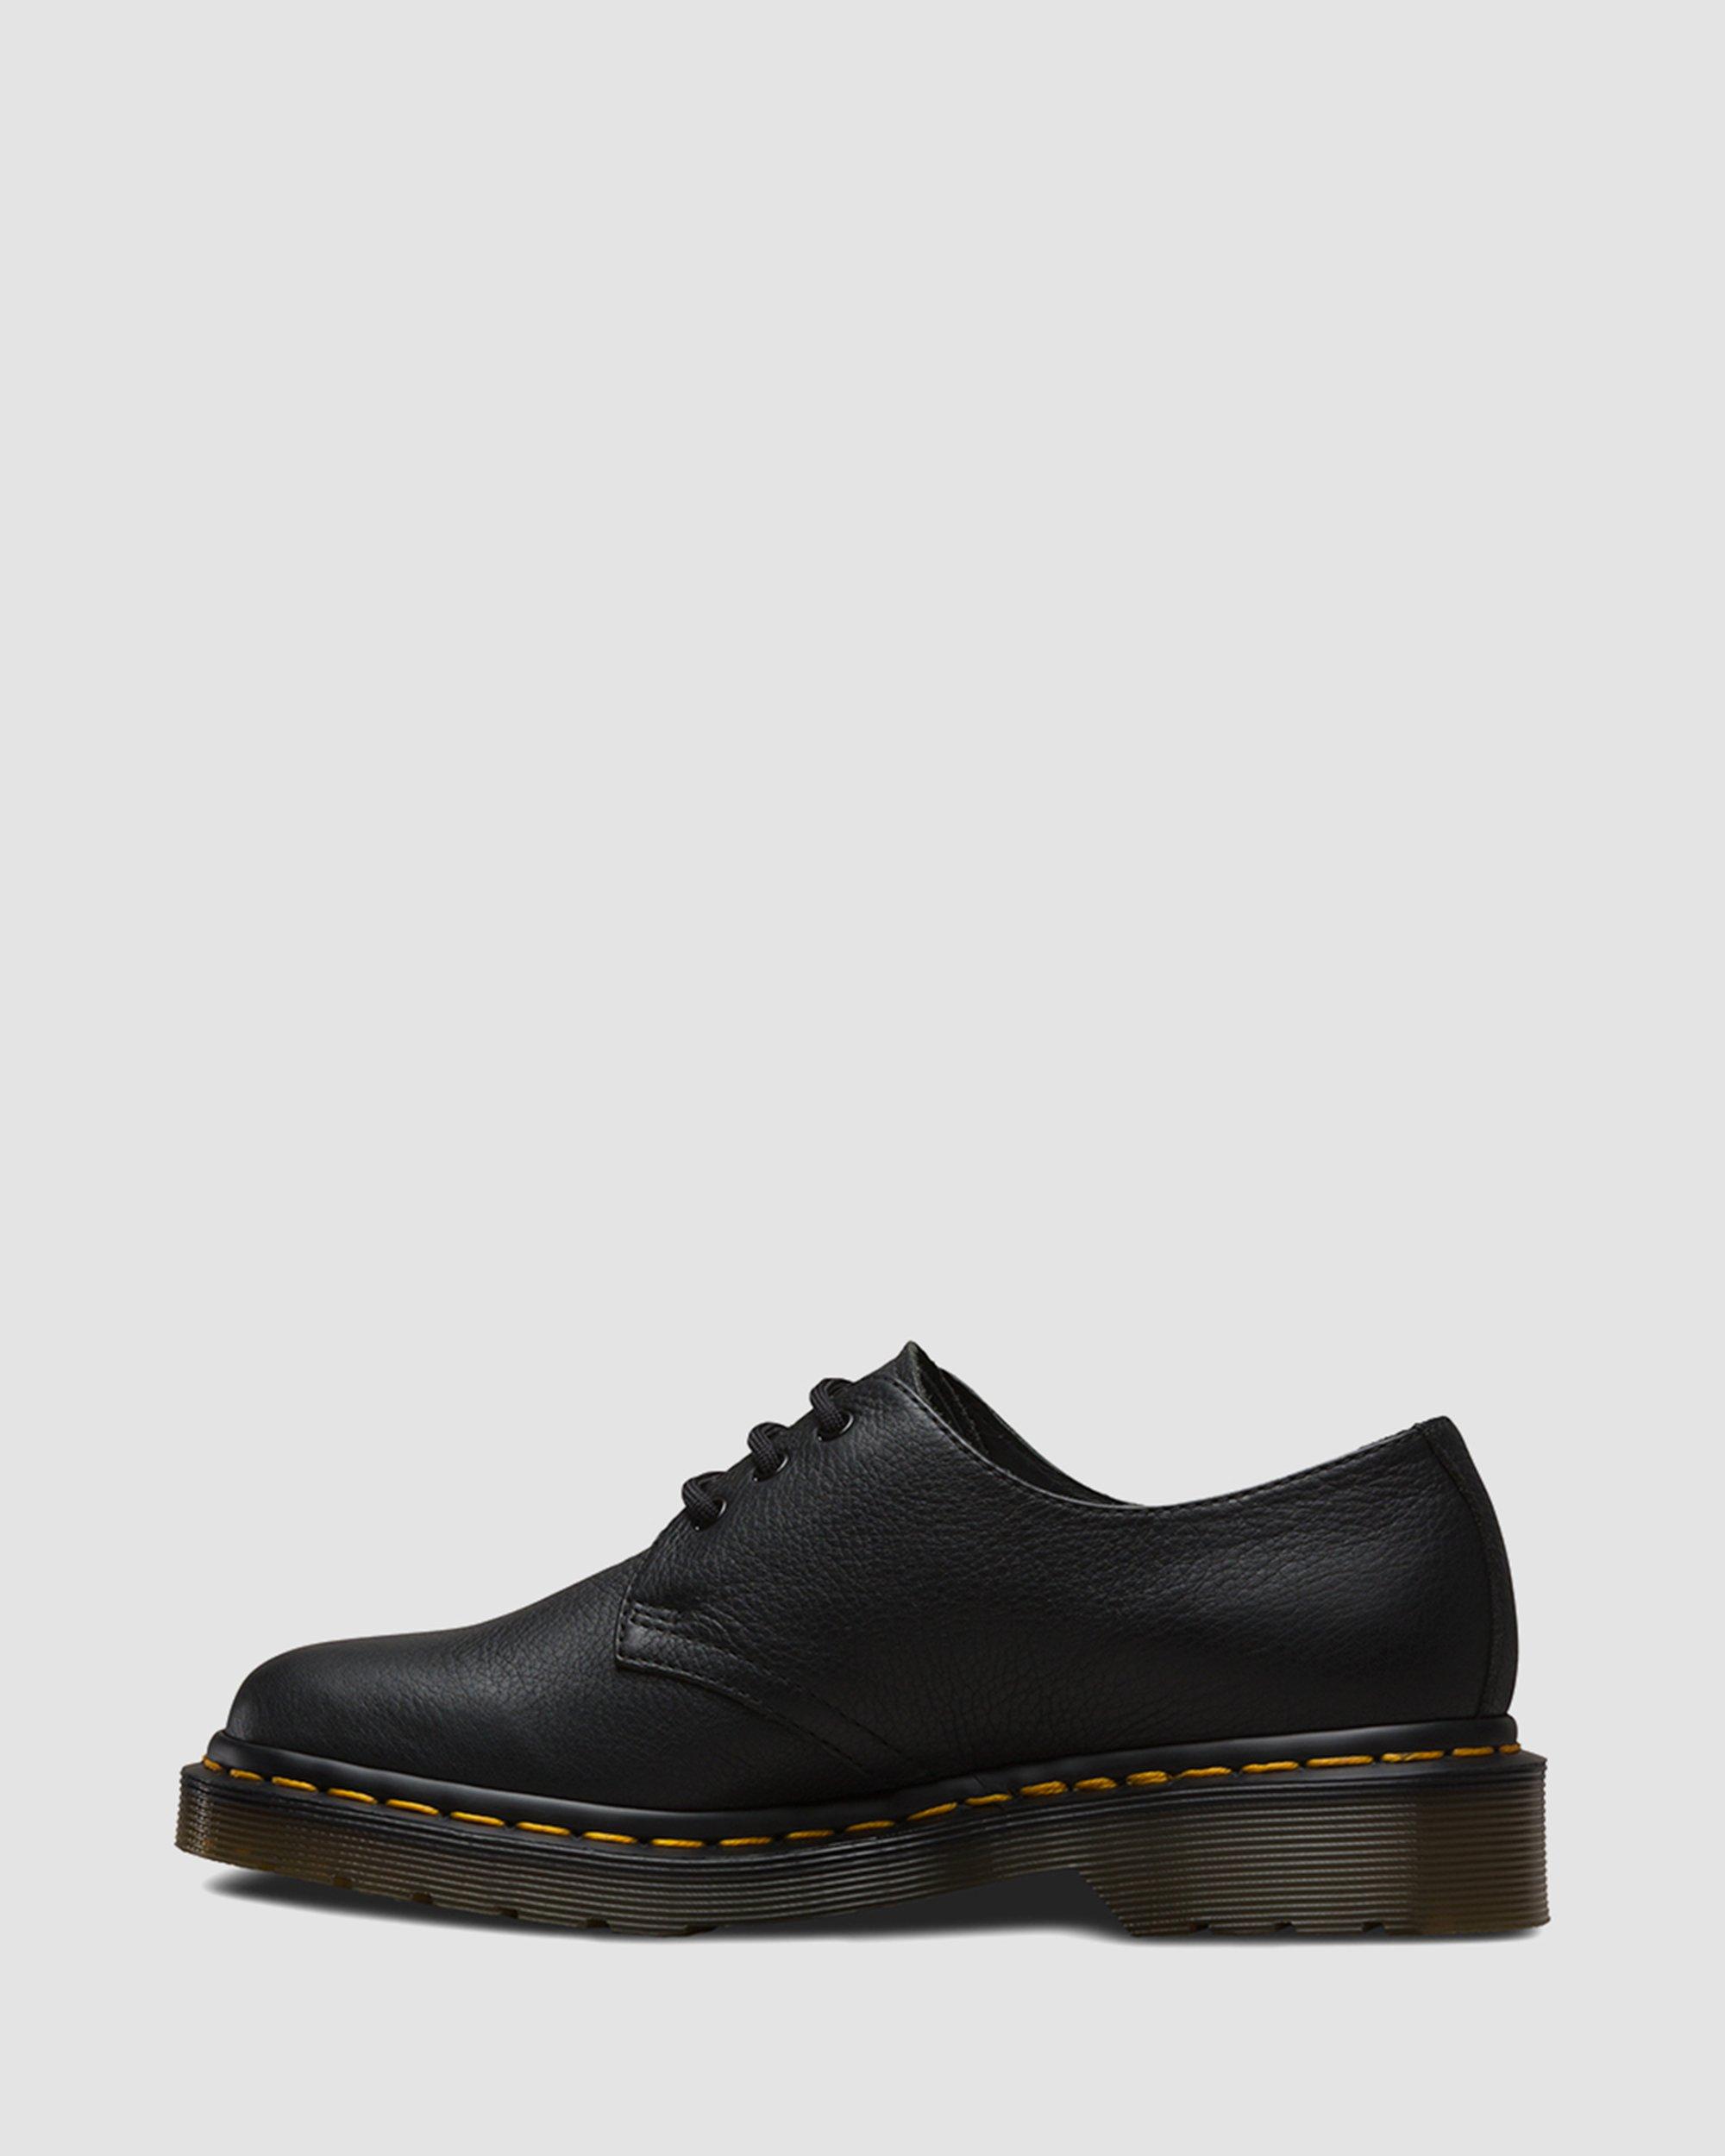 1461 Virginia Leather Shoes in Black